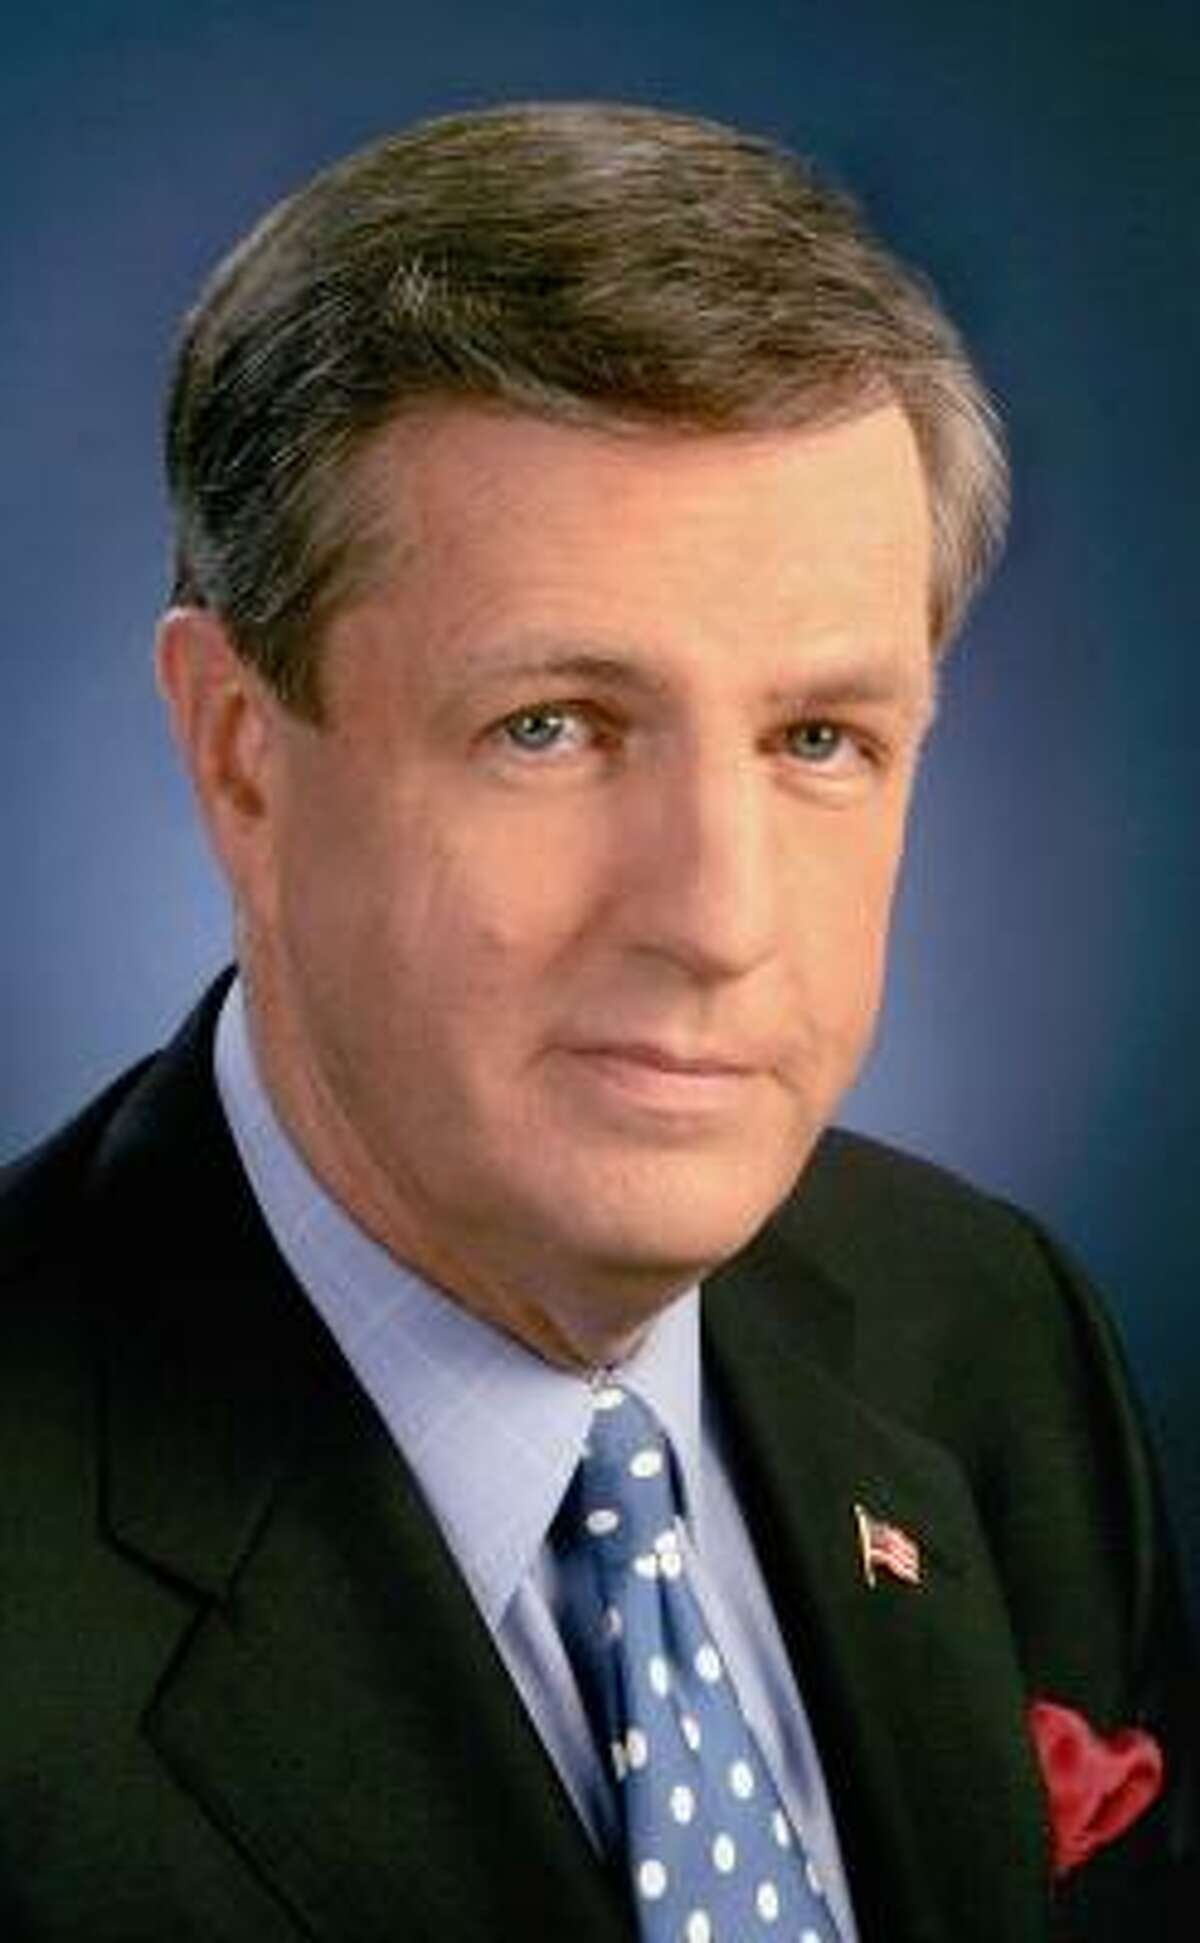 Fox News Channel anchor Brit Hume says this presidential election is all about change.